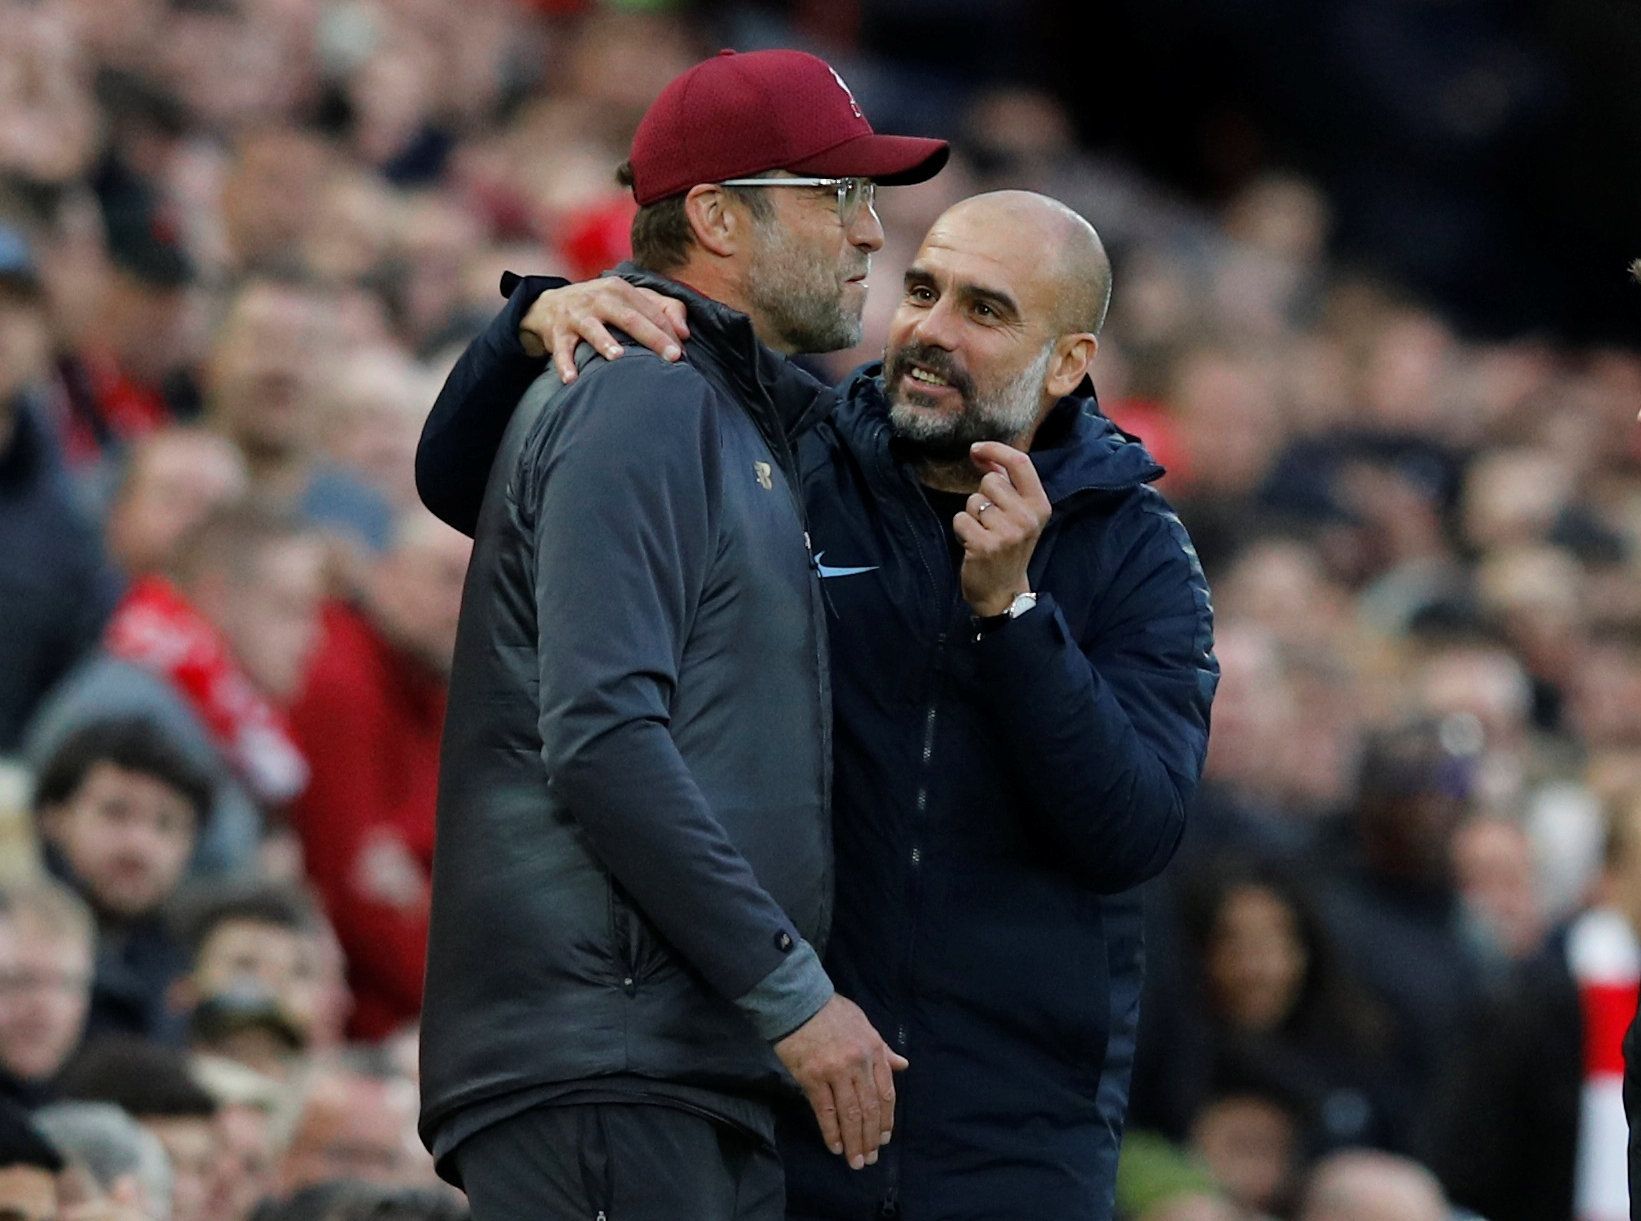 Soccer Football - Premier League - Liverpool v Manchester City - Anfield, Liverpool, Britain - October 7, 2018  Liverpool manager Juergen Klopp with Manchester City manager Pep Guardiola during the match                 REUTERS/Phil Noble  EDITORIAL USE ONLY. No use with unauthorized audio, video, data, fixture lists, club/league logos or 